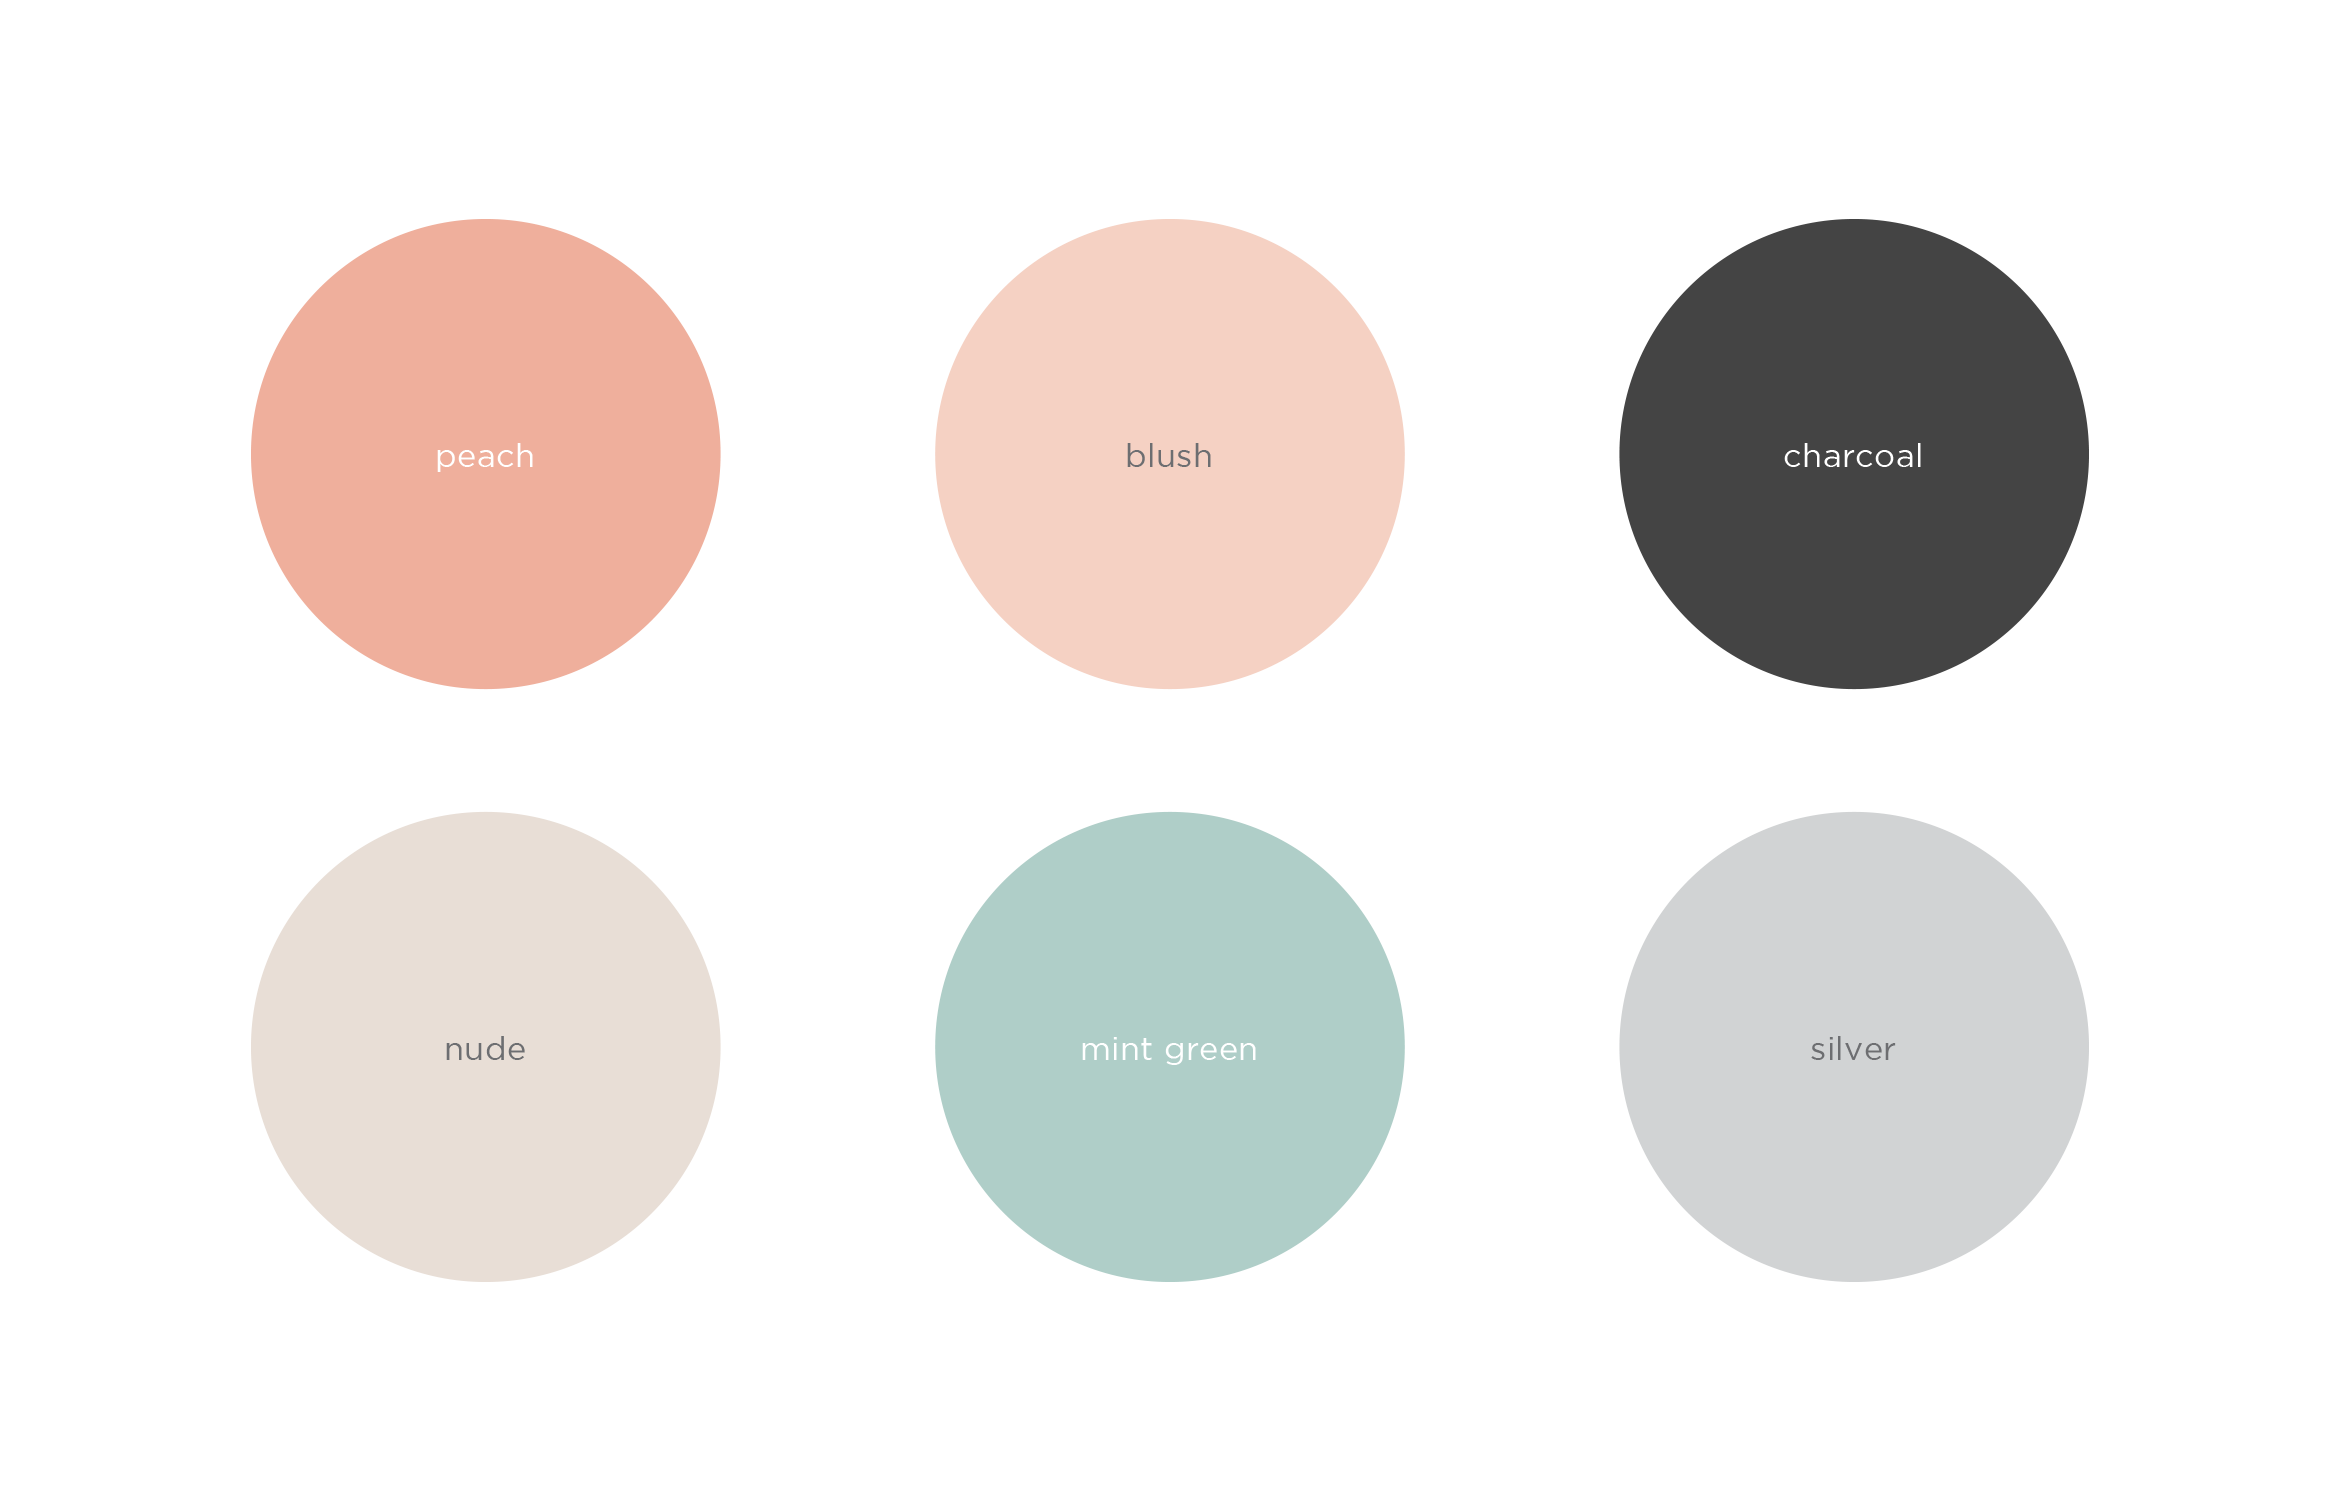 paige brand color palette: peach, blush, nude, mint green, charcoal and silver